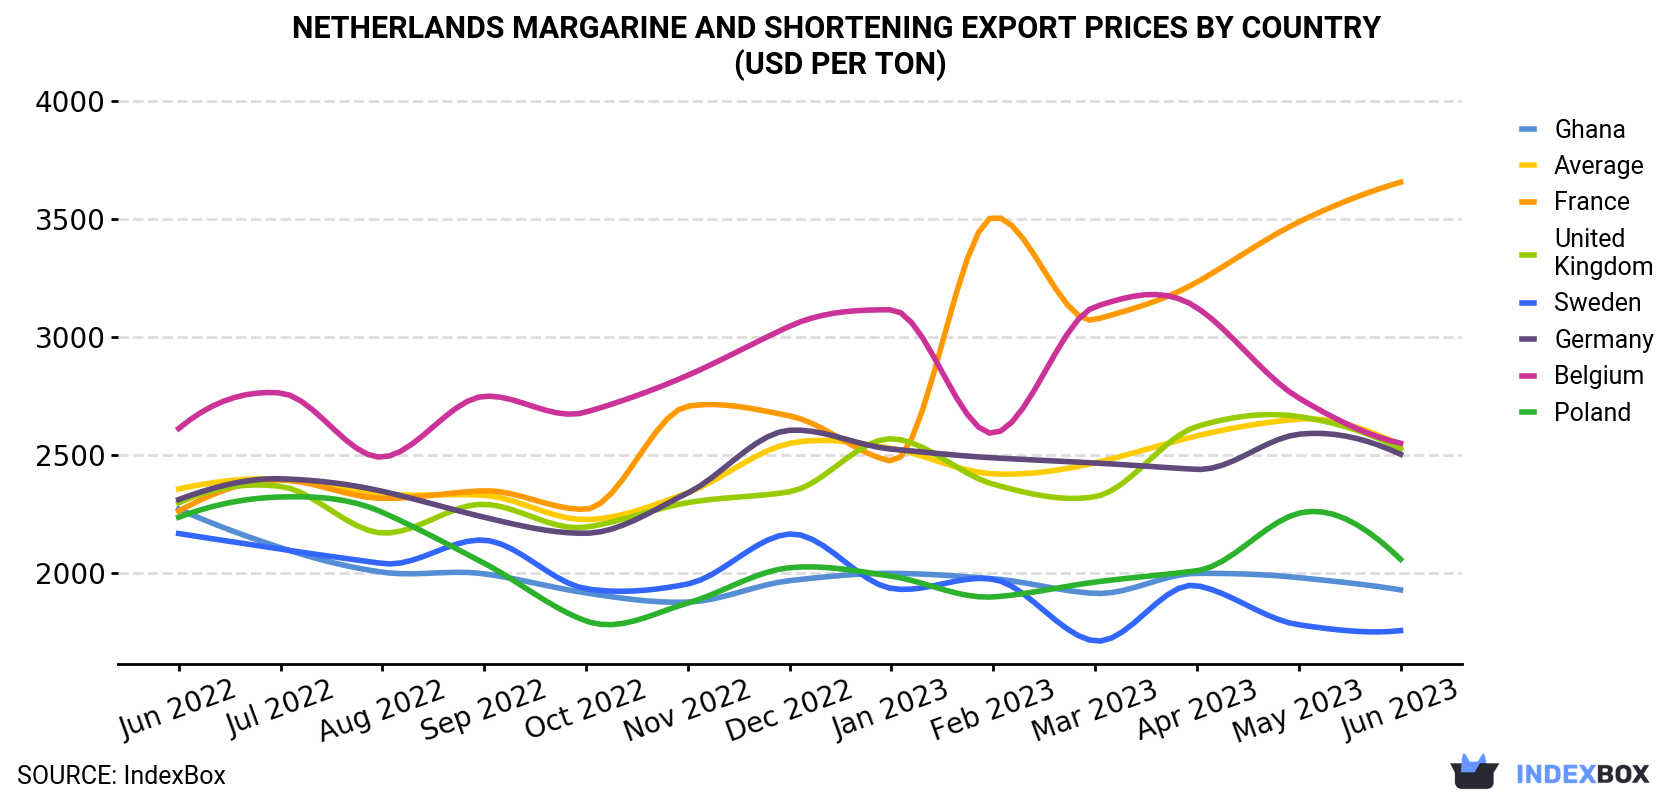 Netherlands Margarine And Shortening Export Prices By Country (USD Per Ton)